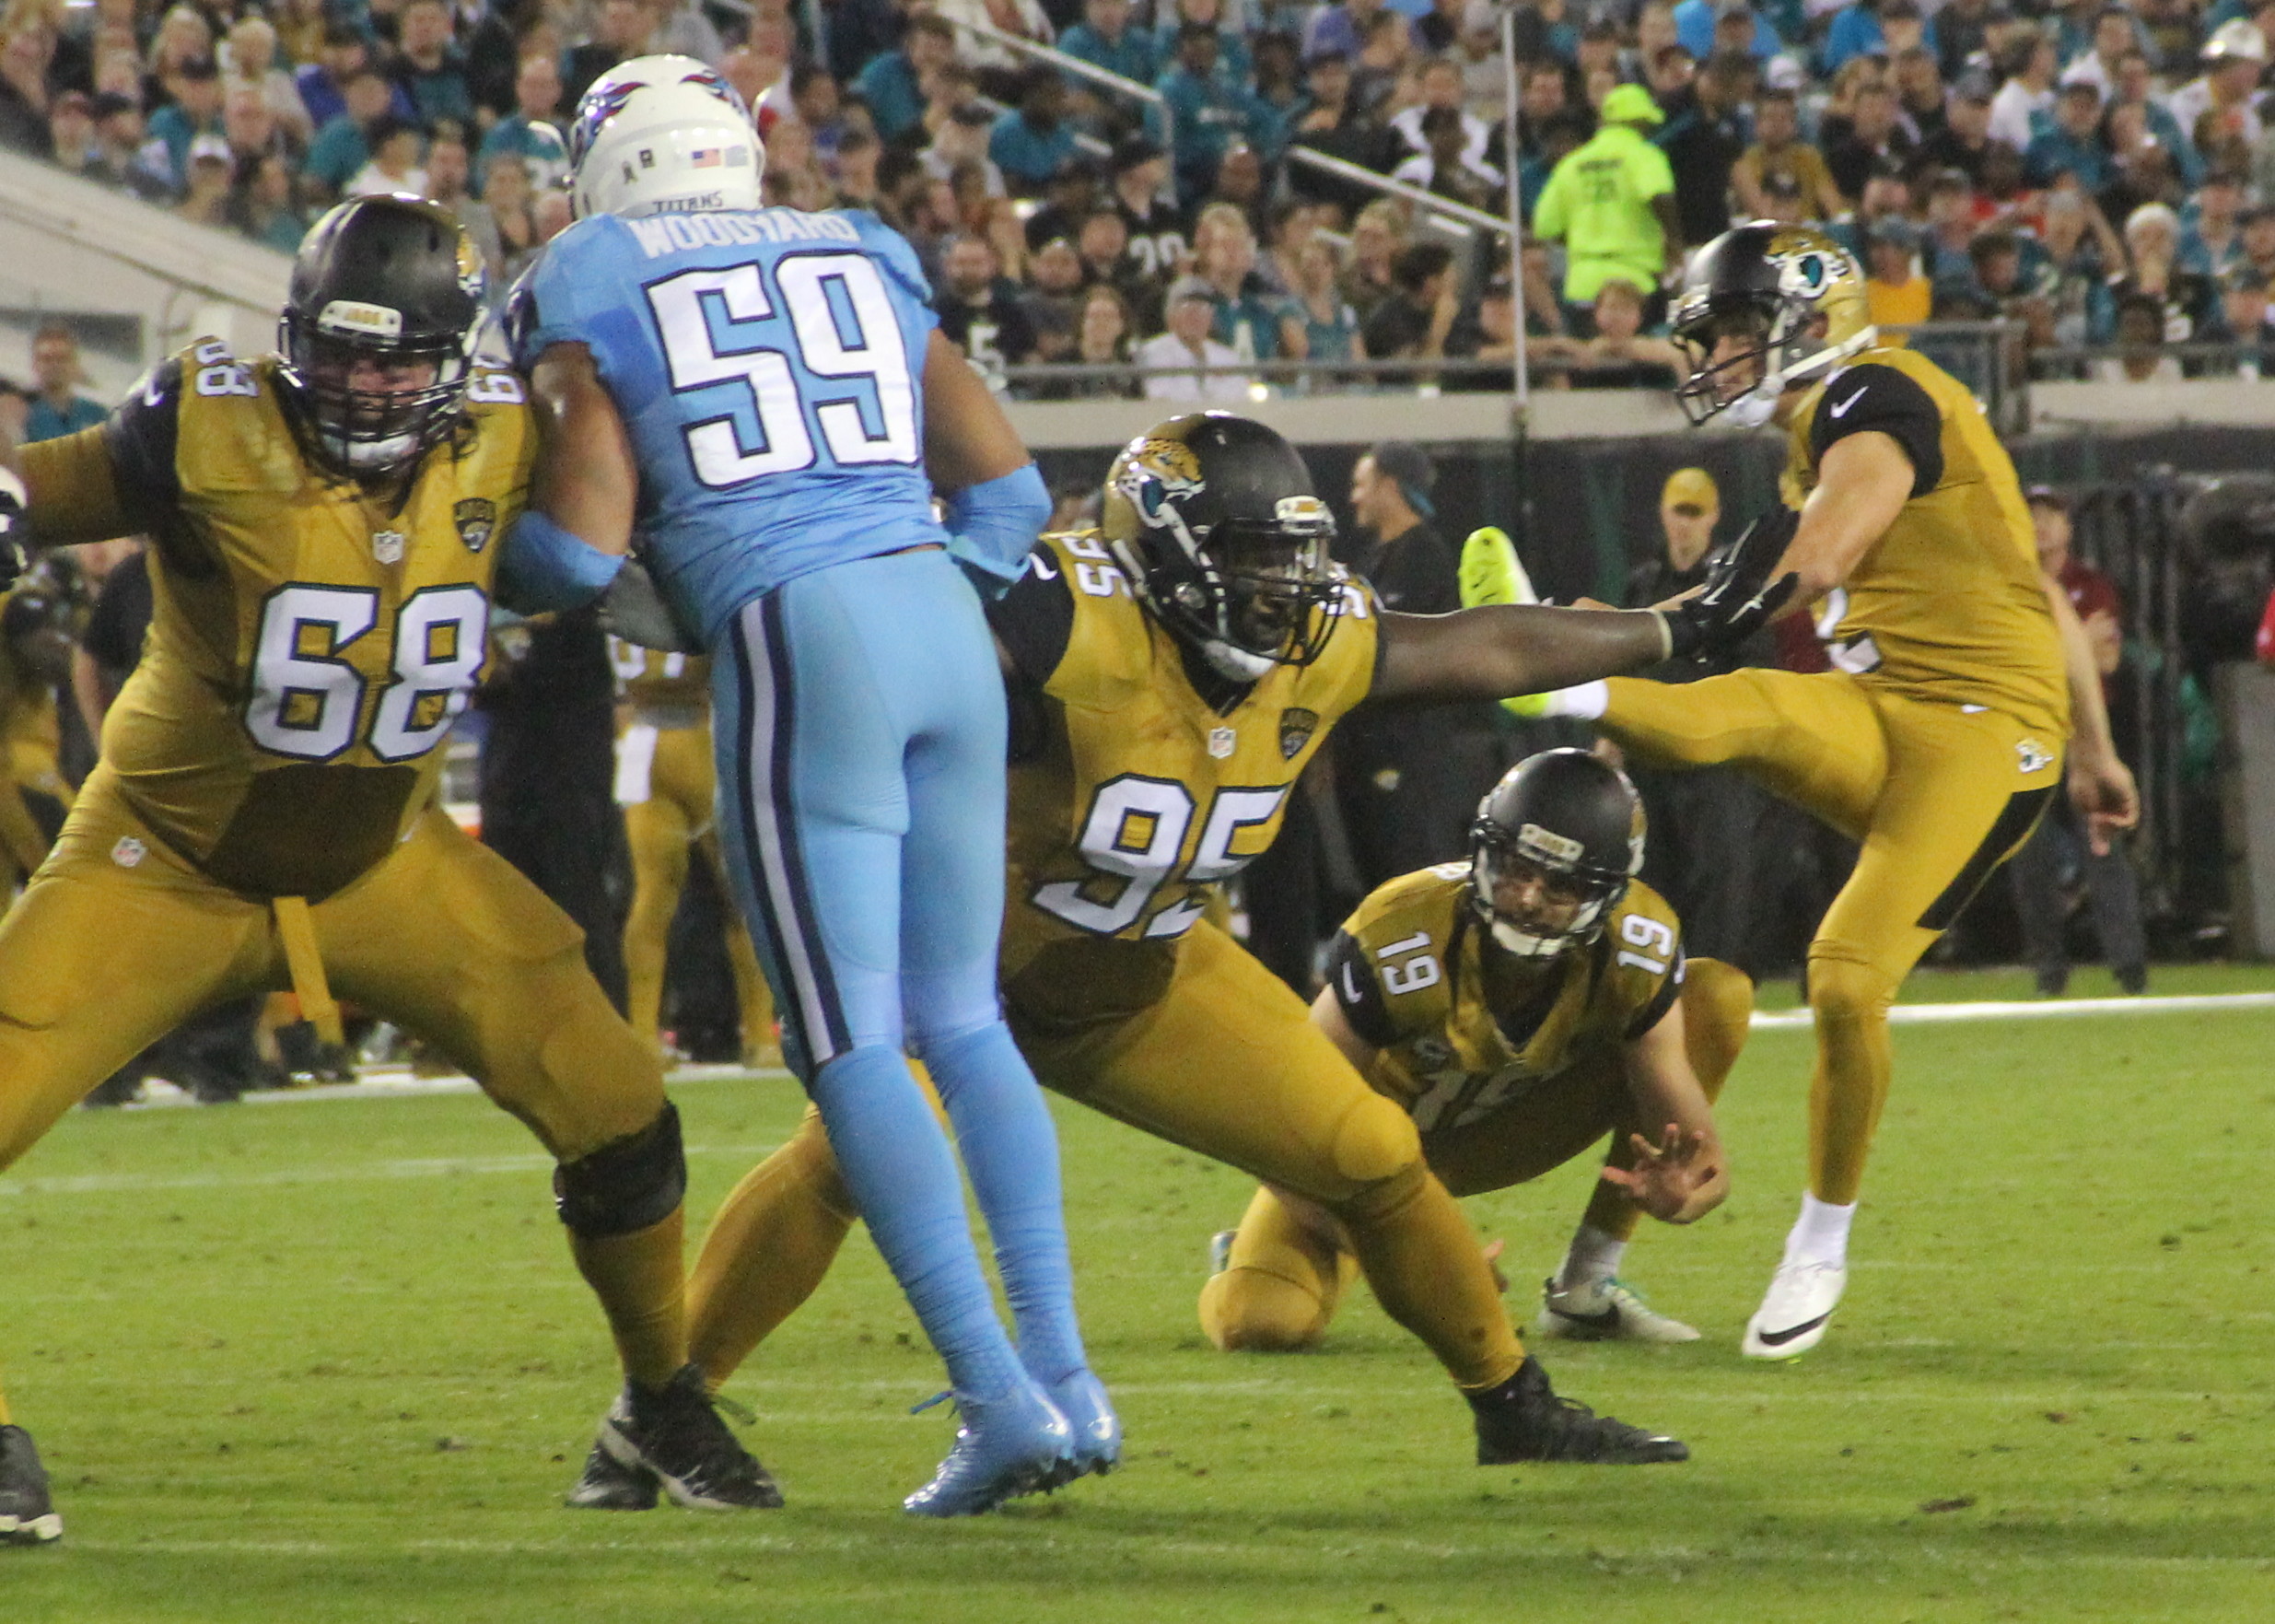 Special teams played a big role in the Jaguars 19-13 win over AFC South rival Tennessee Thursday night. Jason Myers went five for five including four field goals. (Photo by Nancy Beecher)